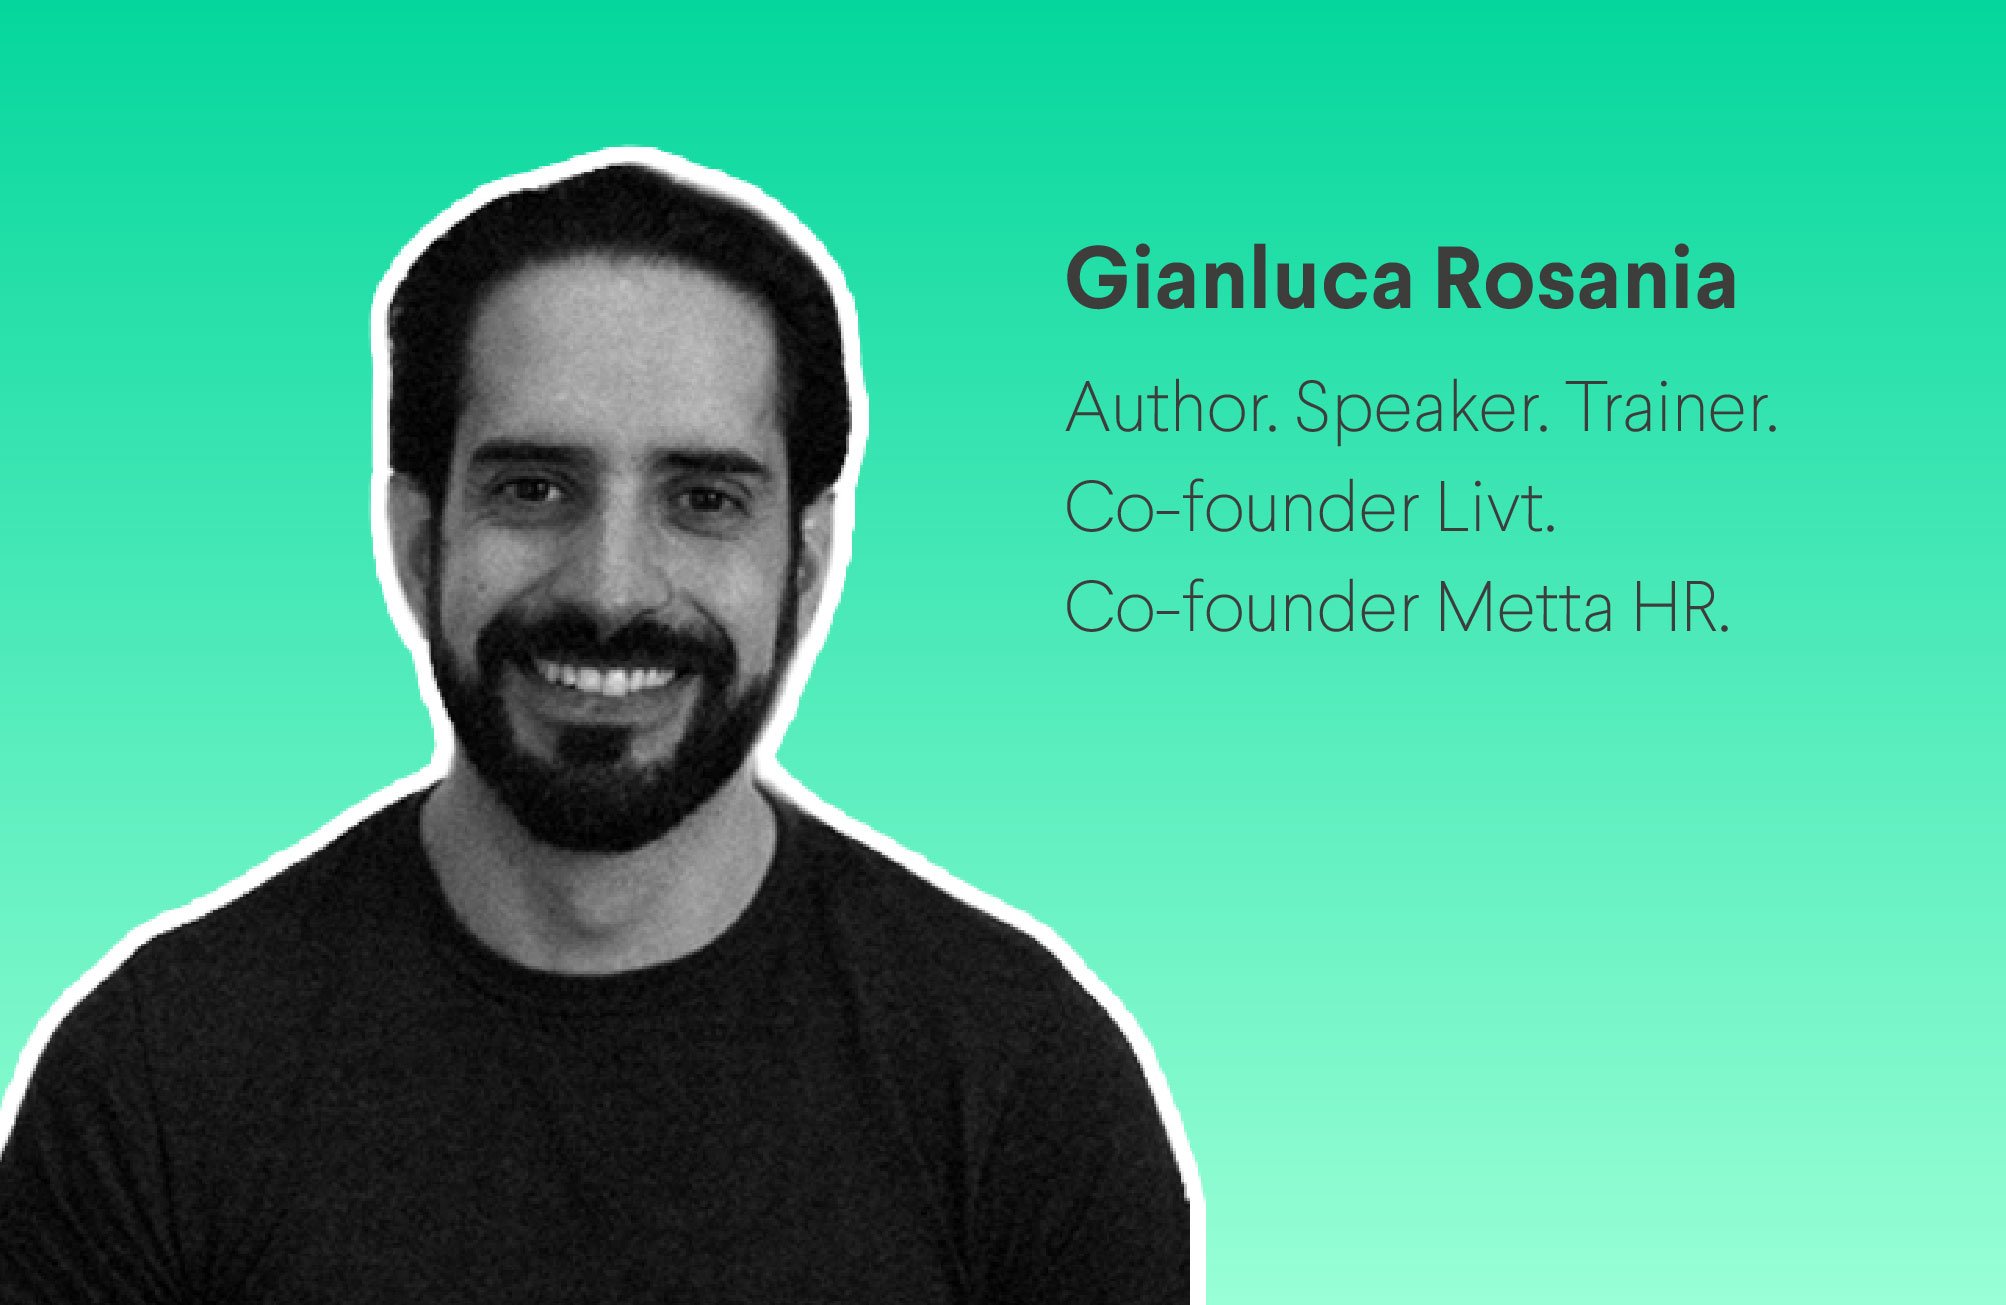 Gianluca Rosania: “I am building the first HR School in the Metaverse, Metta HR.”